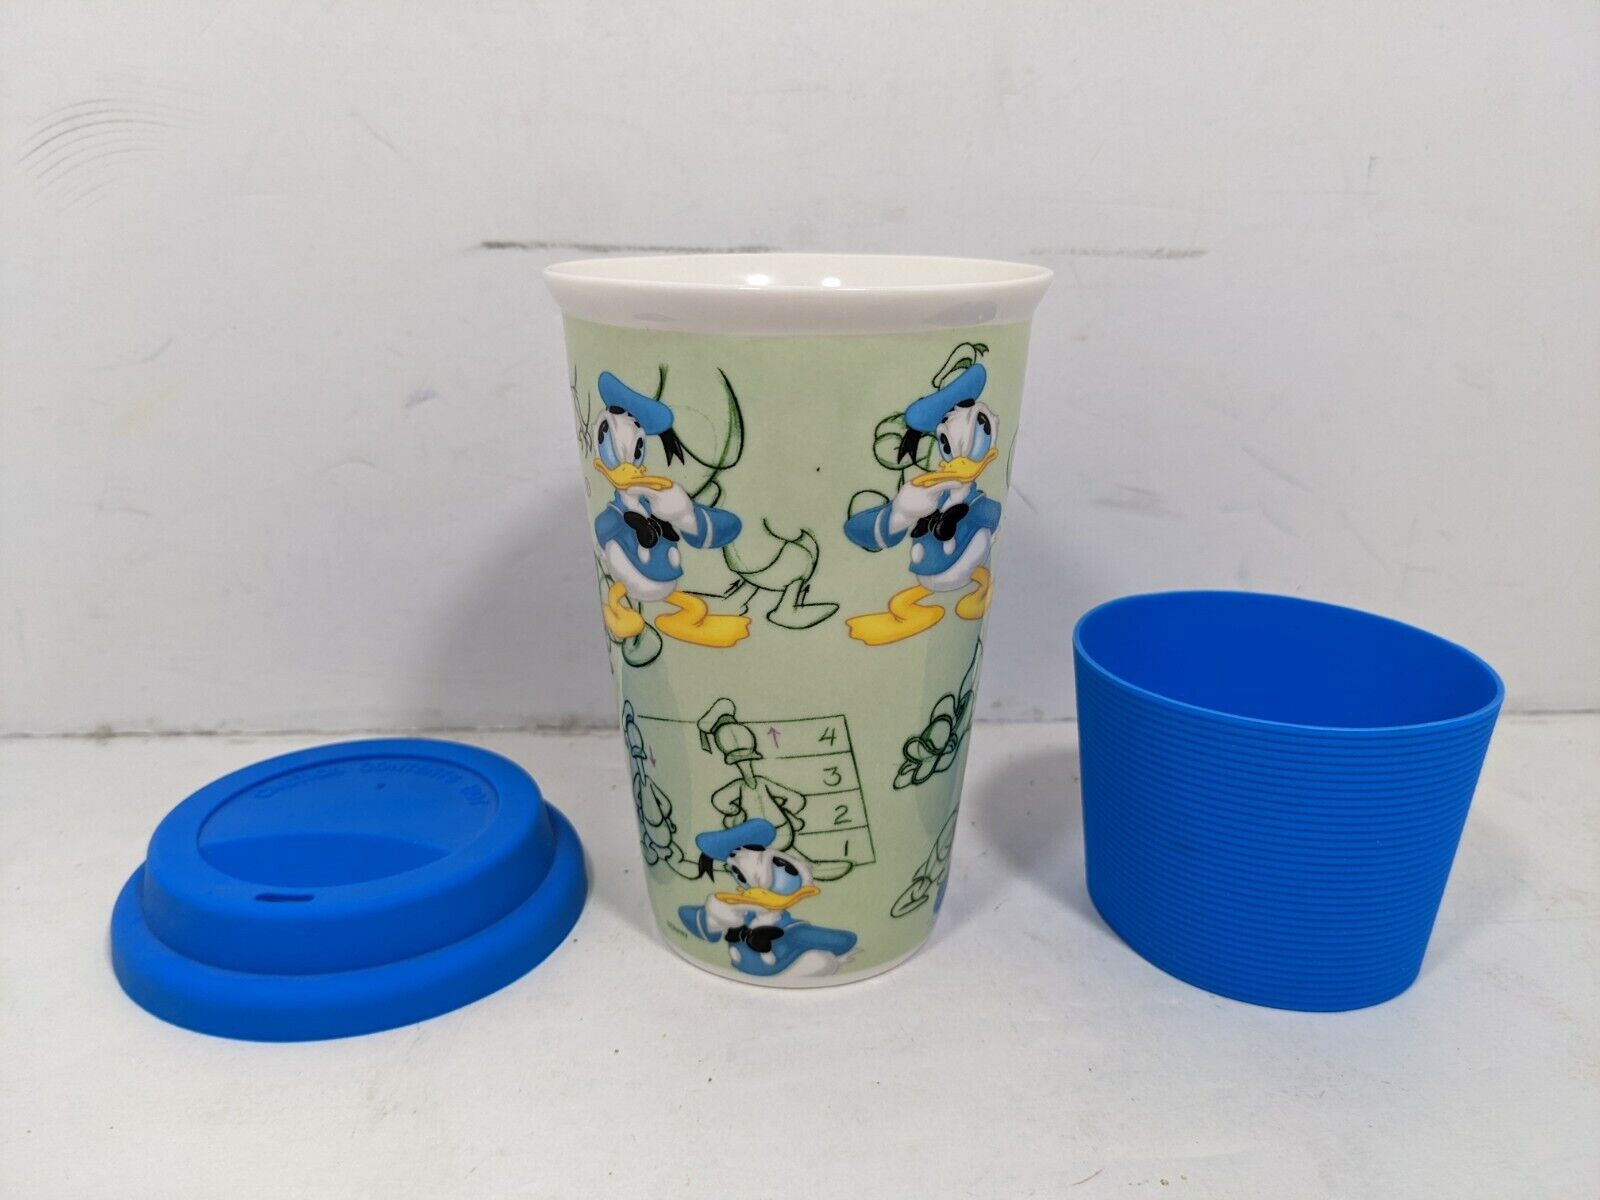 6 Inch Disney Donald Duck Kcare Ceramic Coffee Travel Cup